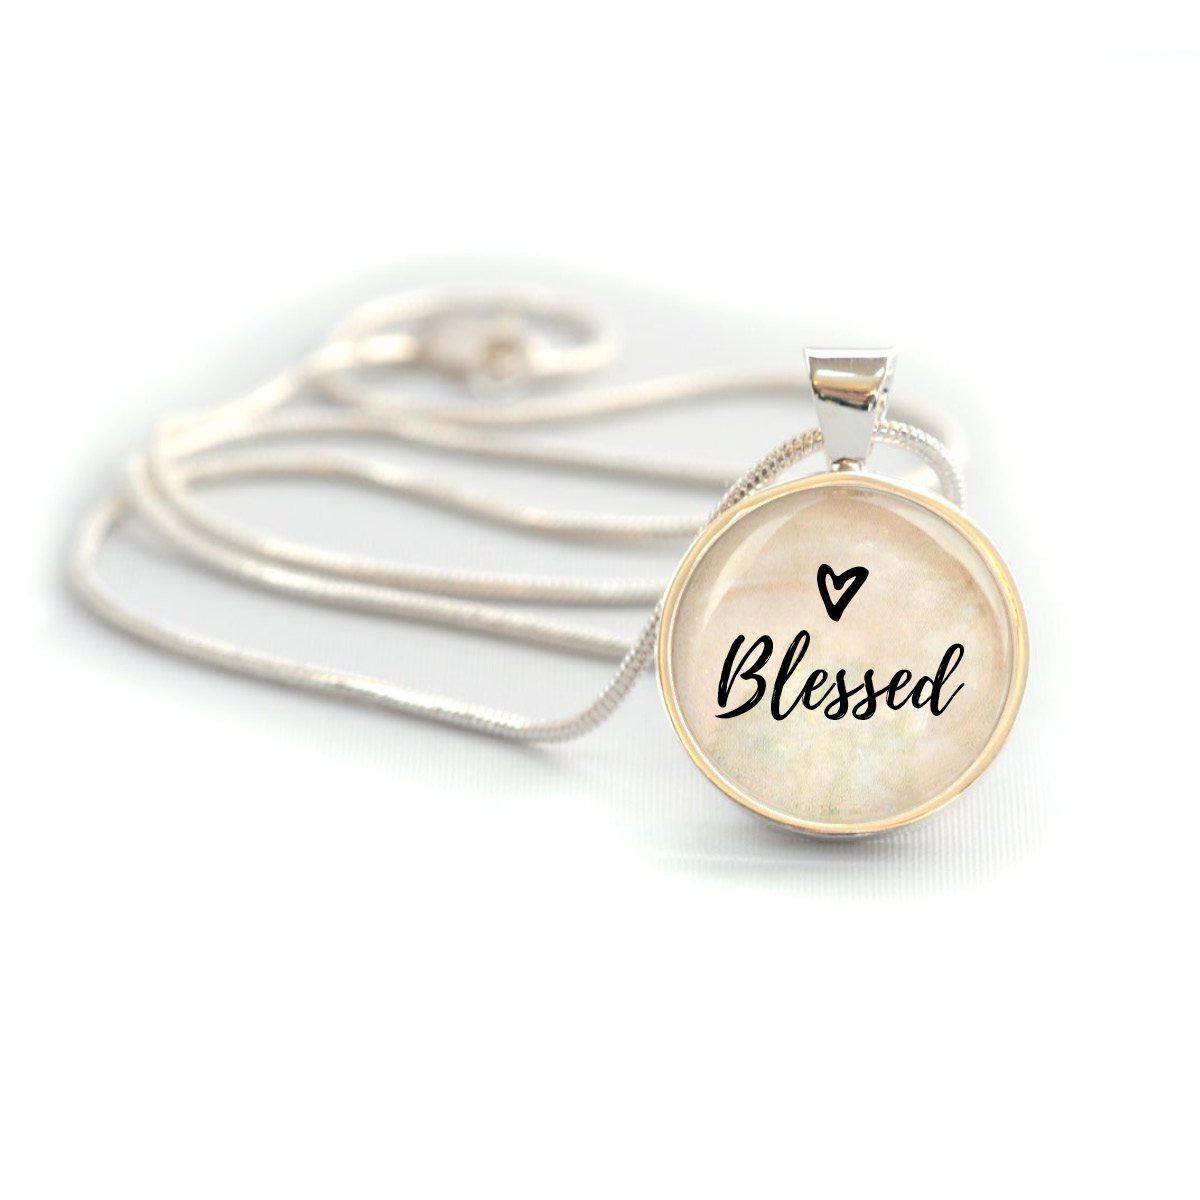 "Blessed" Silver-Plated Christian Pendant Necklace (20mm)